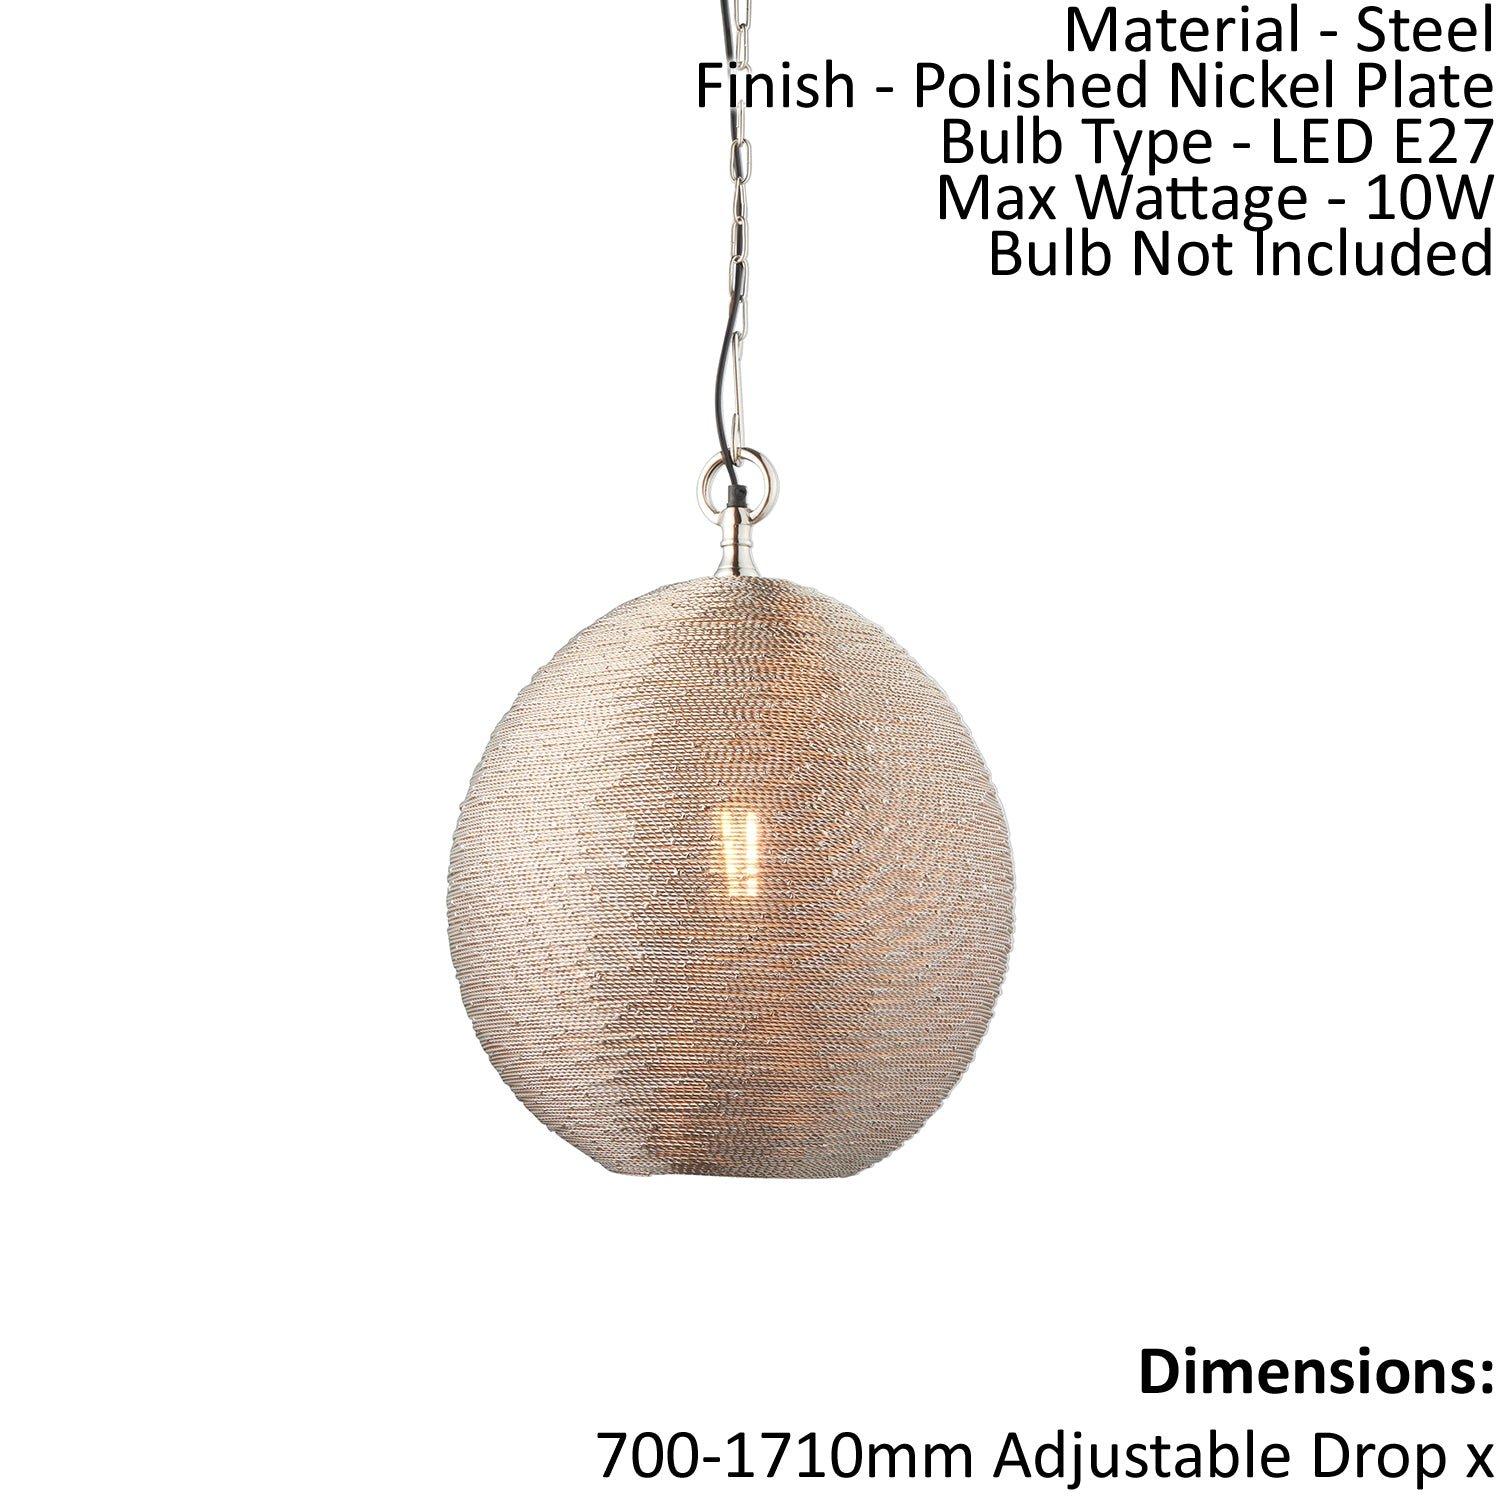 Ceiling Pendant Light - Polished Nickel Plate - 10W LED E27 - Dimmable - e10028